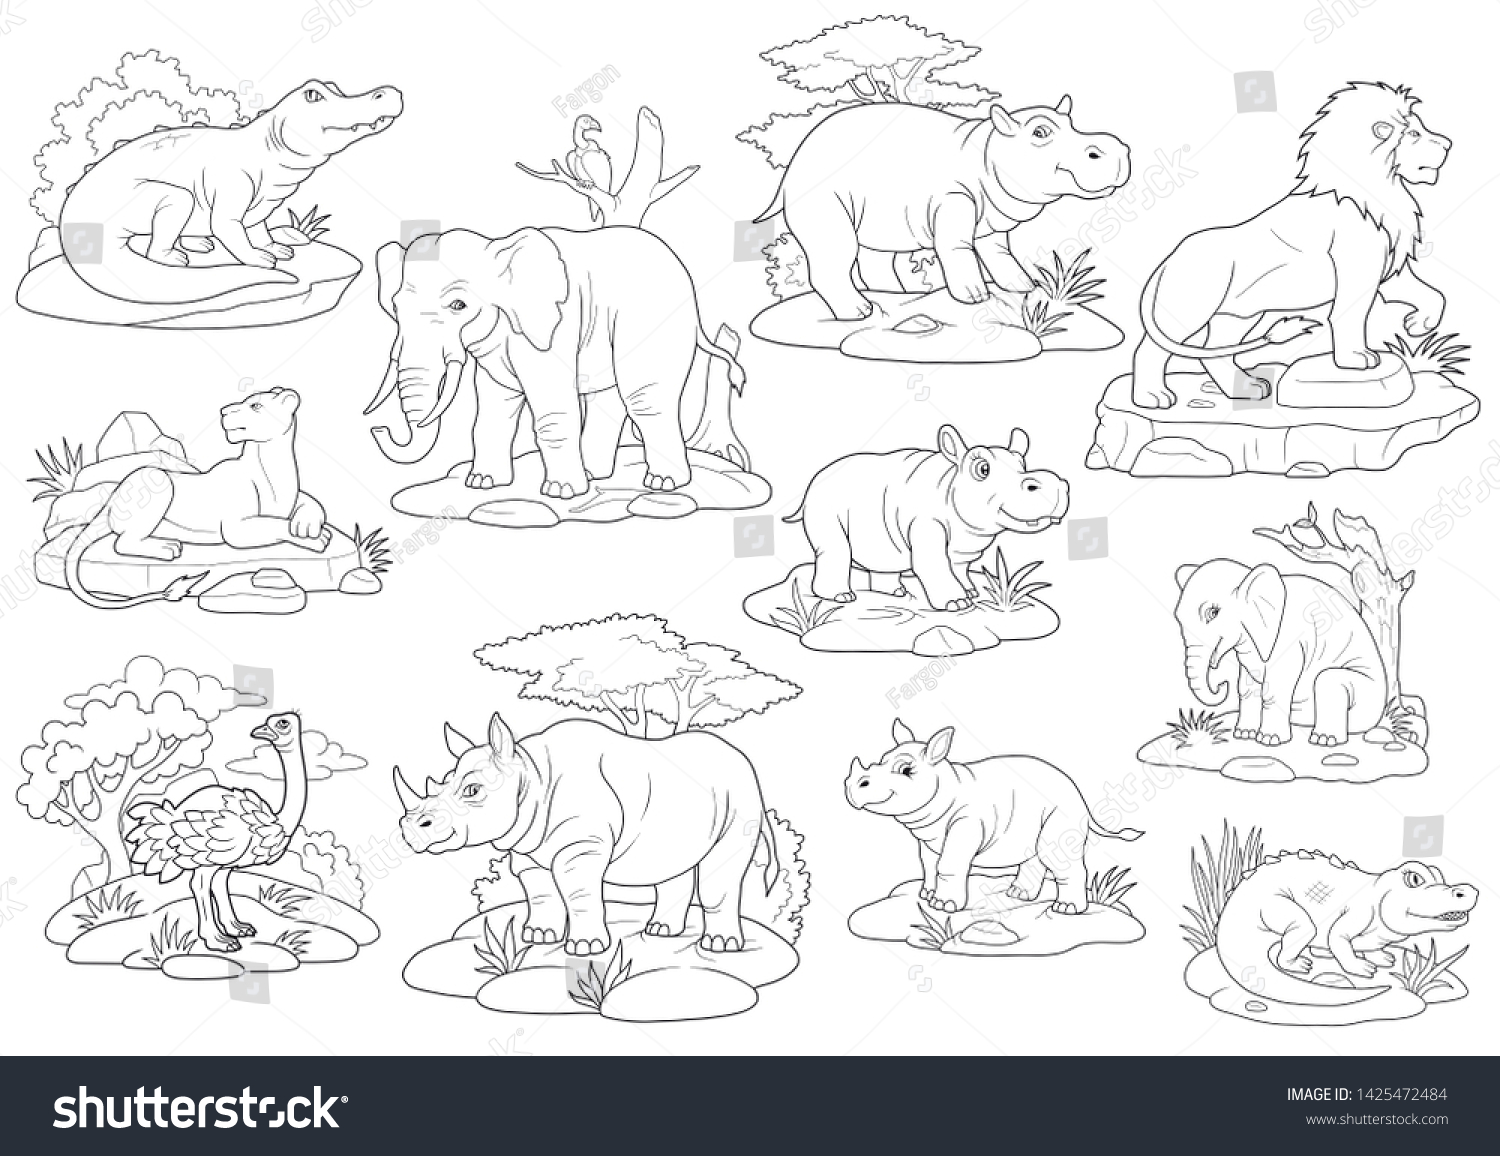 Awesome wild animal coloring page